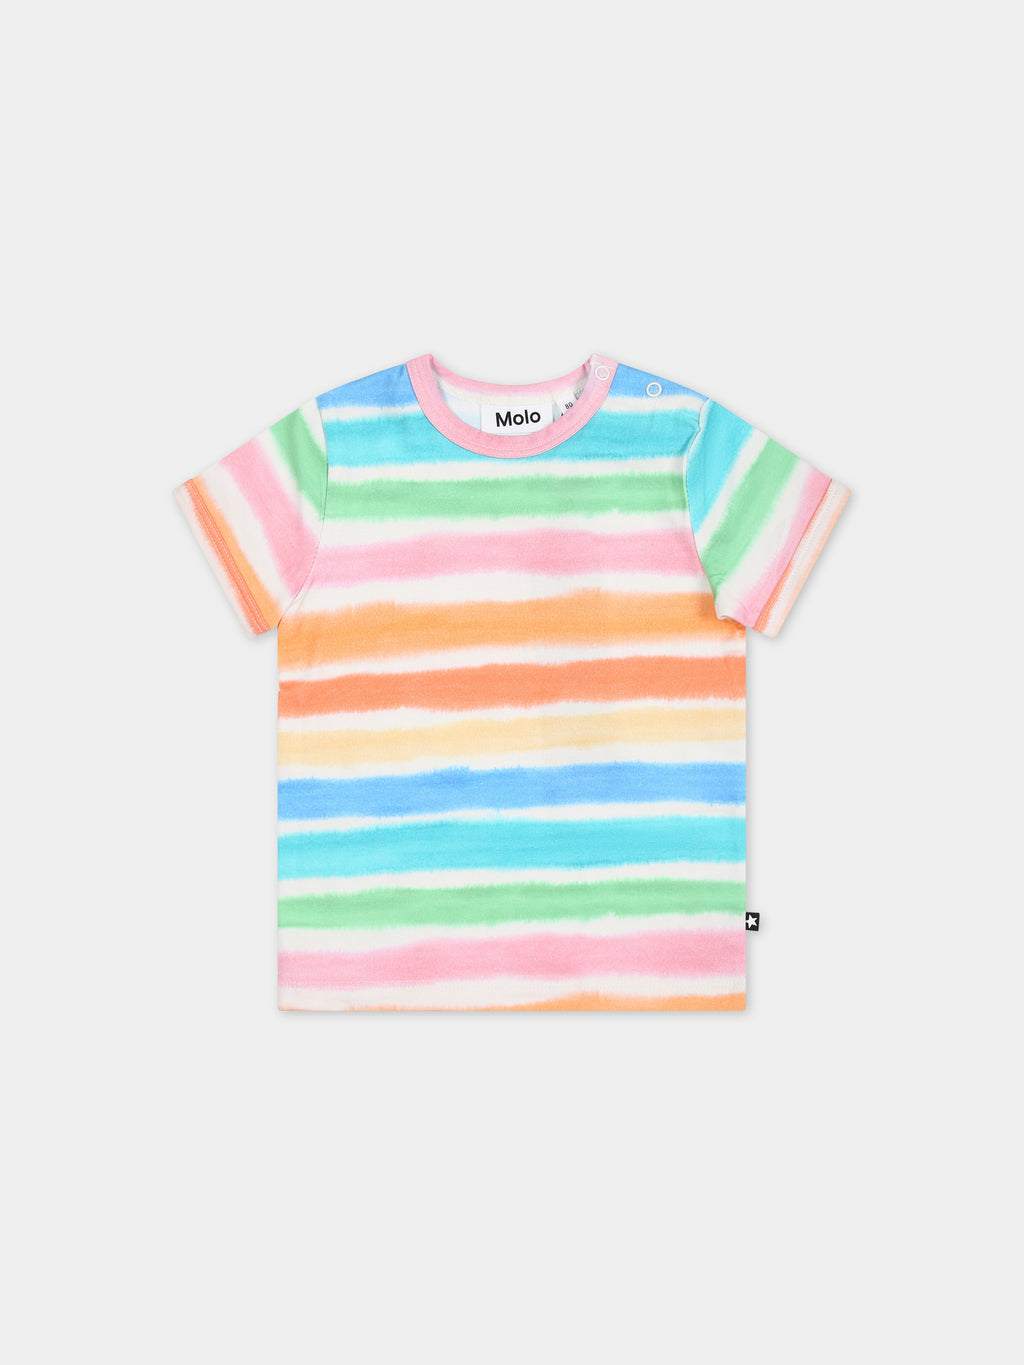 Multicolor t-shirt for baby kids